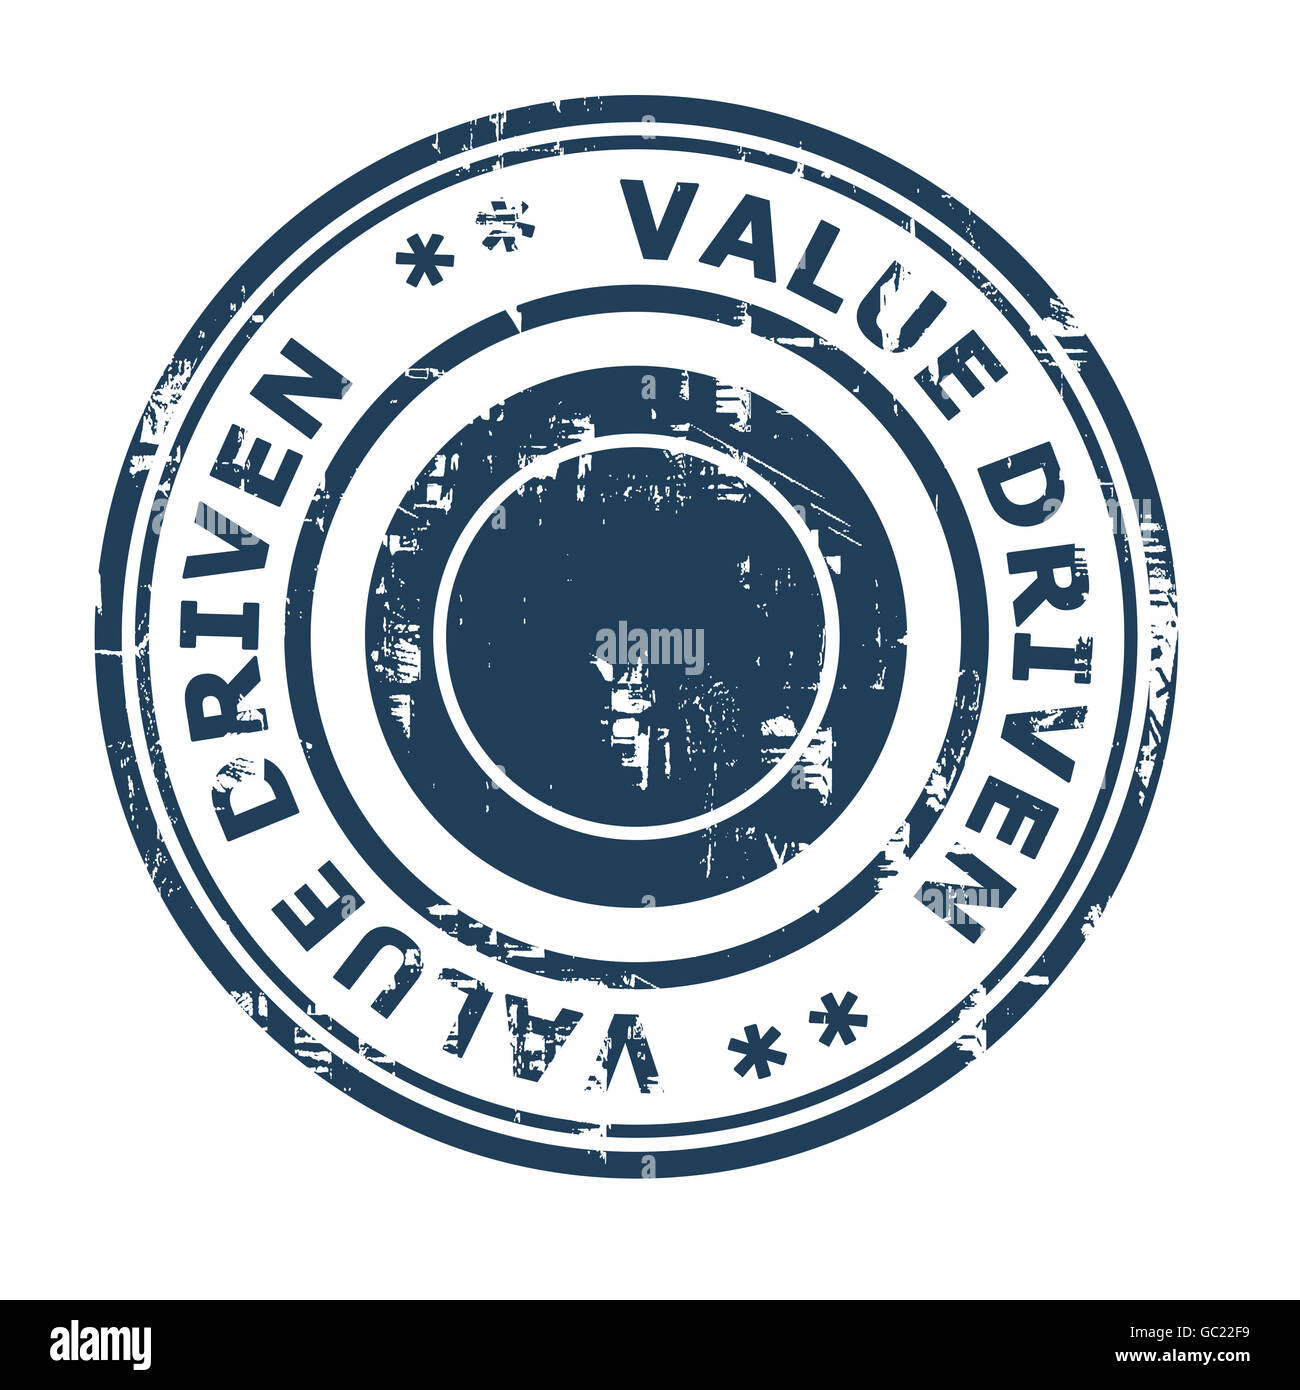 Value driven business concept rubber stamp isolated on a white background. Stock Photo